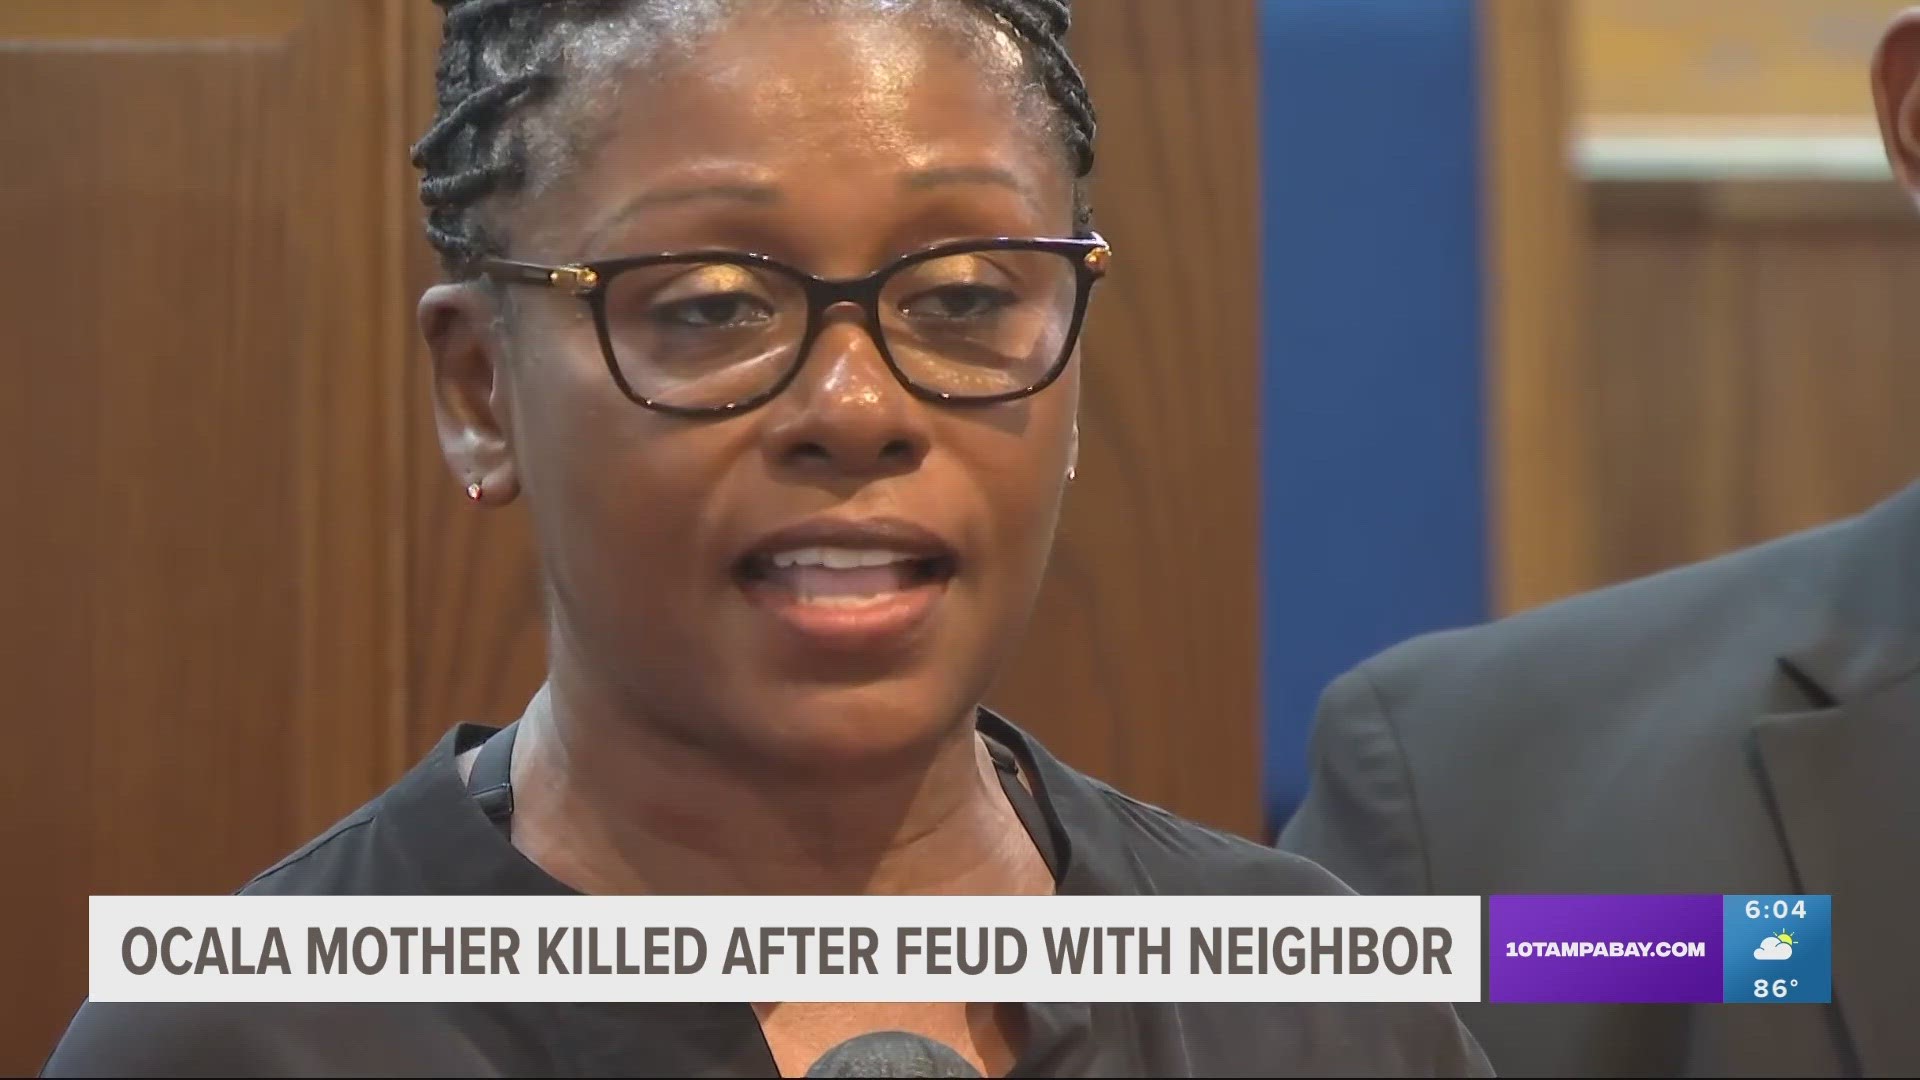 A two-and-a-half-year neighborhood feud over playing children has ended in a Florida mother's fatal shooting, officials said Monday.